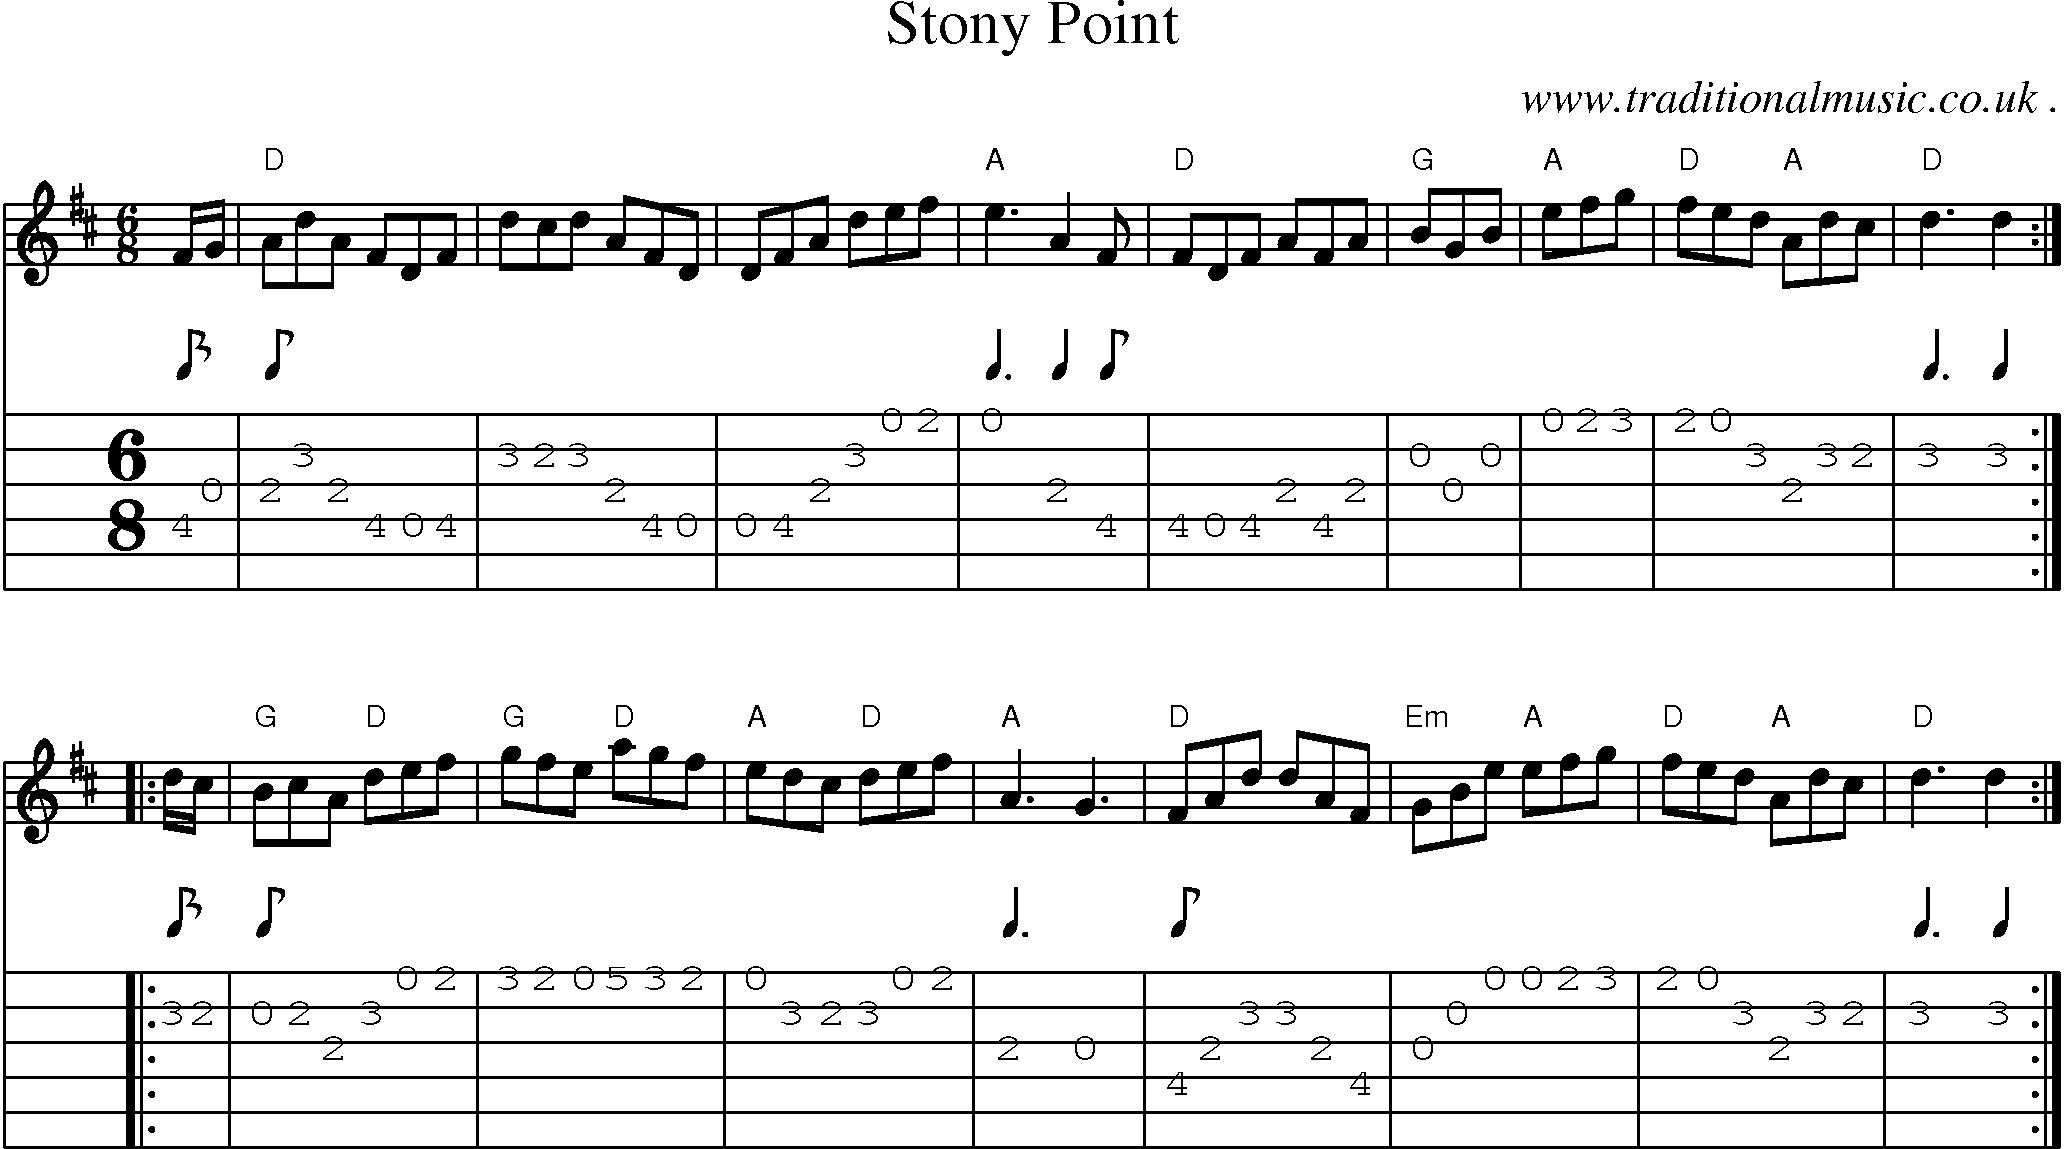 Sheet-music  score, Chords and Guitar Tabs for Stony Point